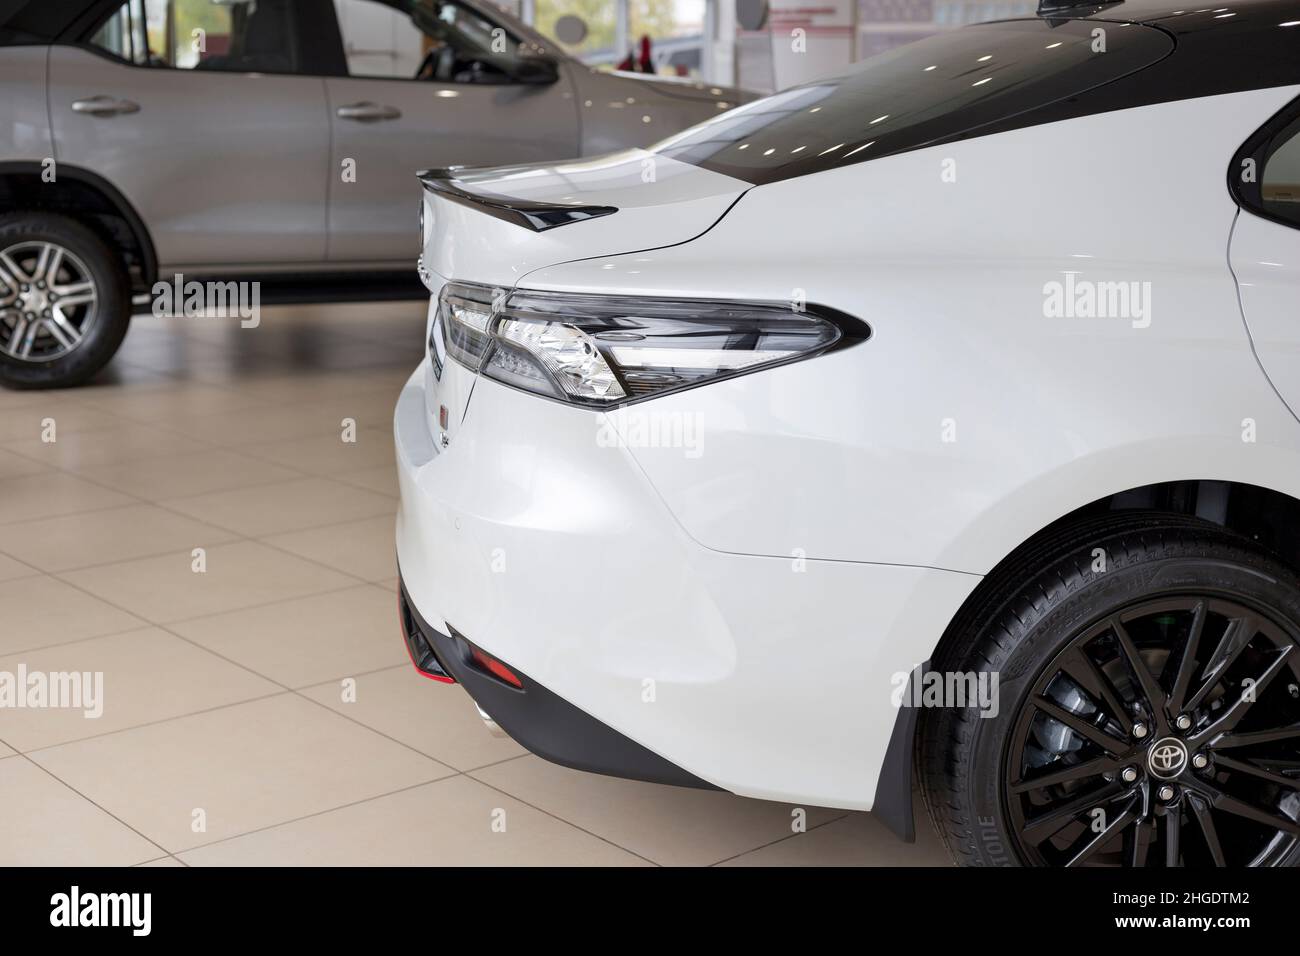 Russia, Izhevsk - September 30, 2021: Toyota showroom. New Toyota Camry car with elegant rear lights in dealer showroom. Cropped image. Famous brand. Stock Photo